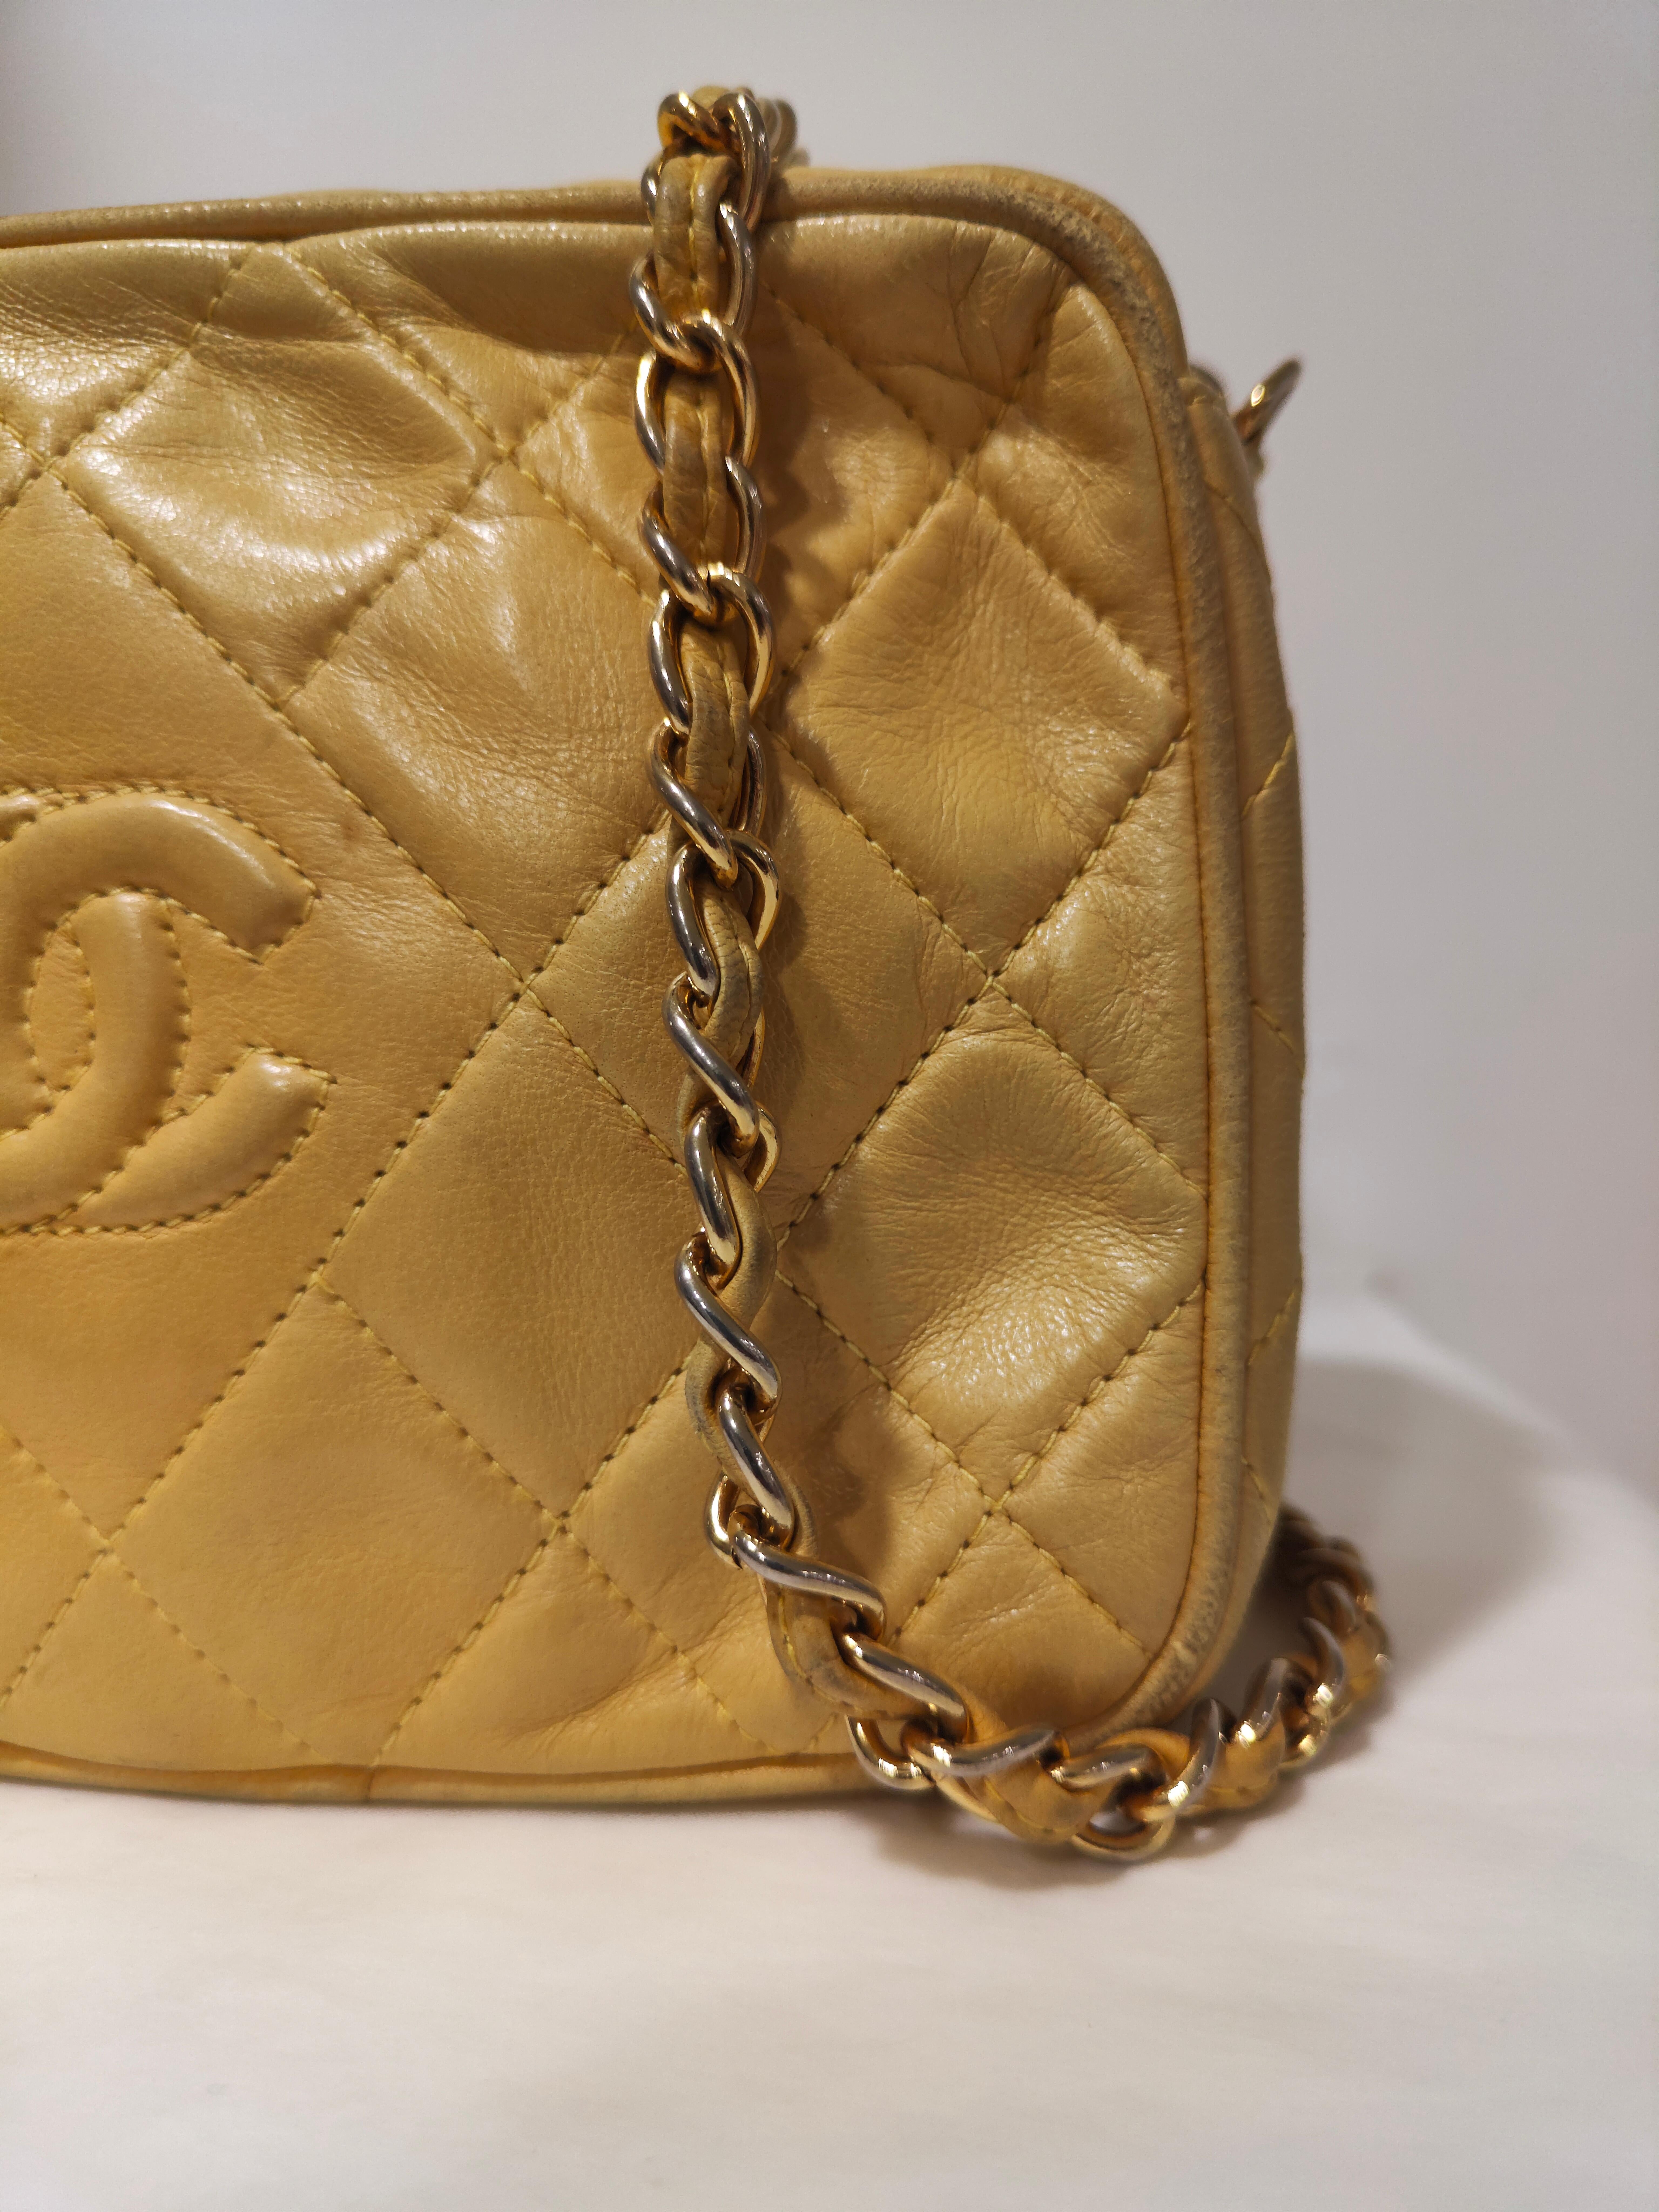 Chanel Yellow leather camera shoulder bag 2